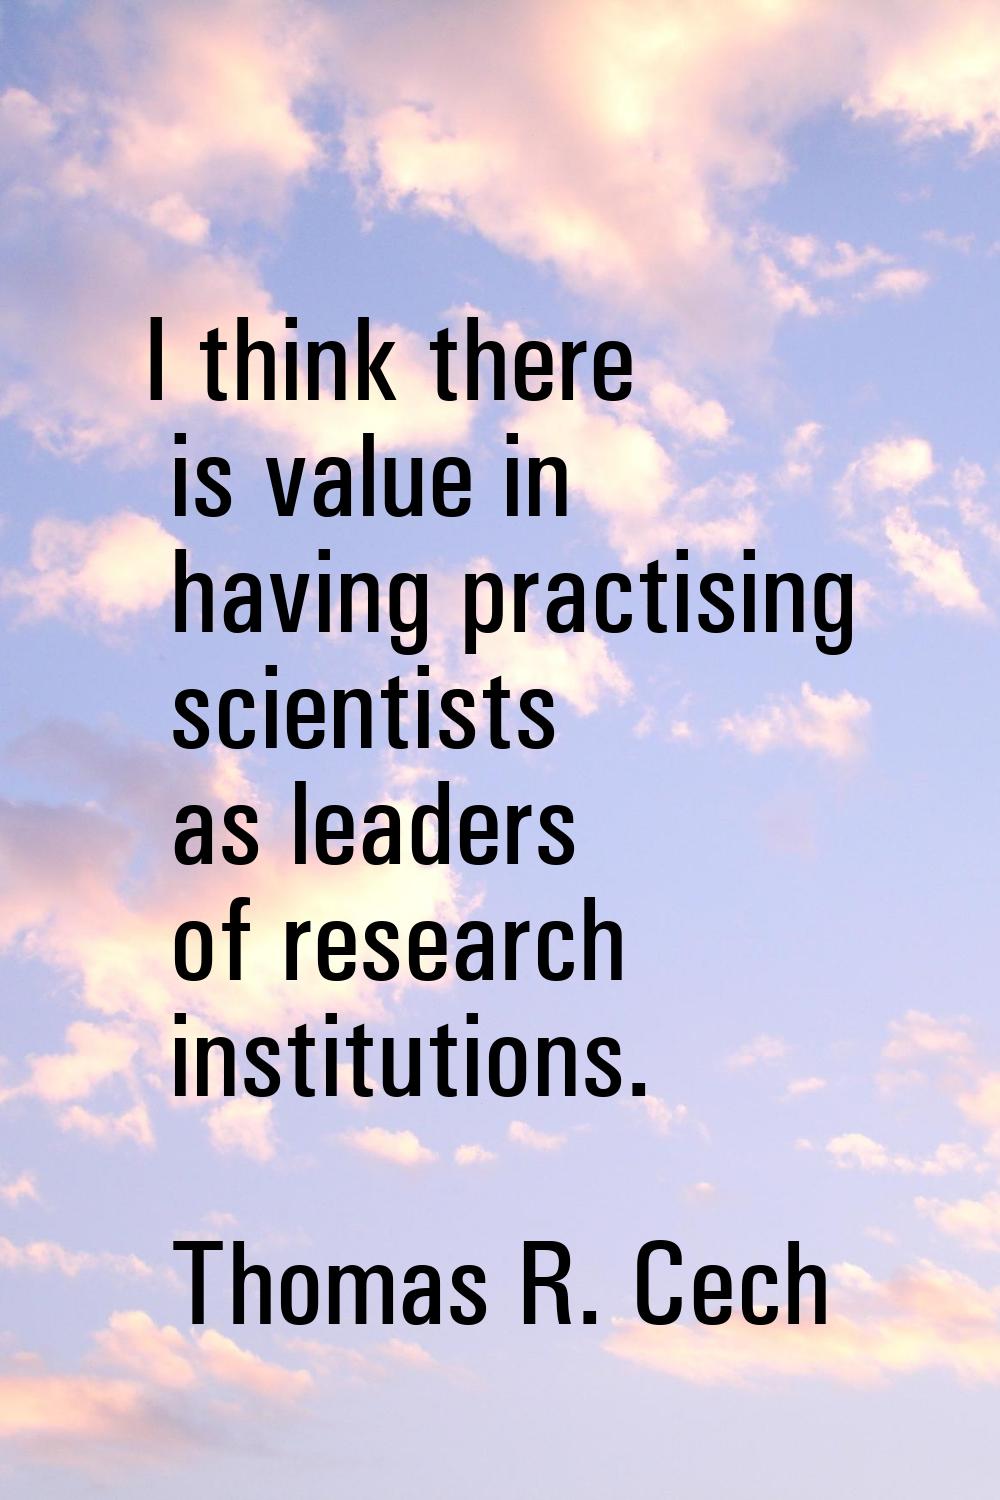 I think there is value in having practising scientists as leaders of research institutions.